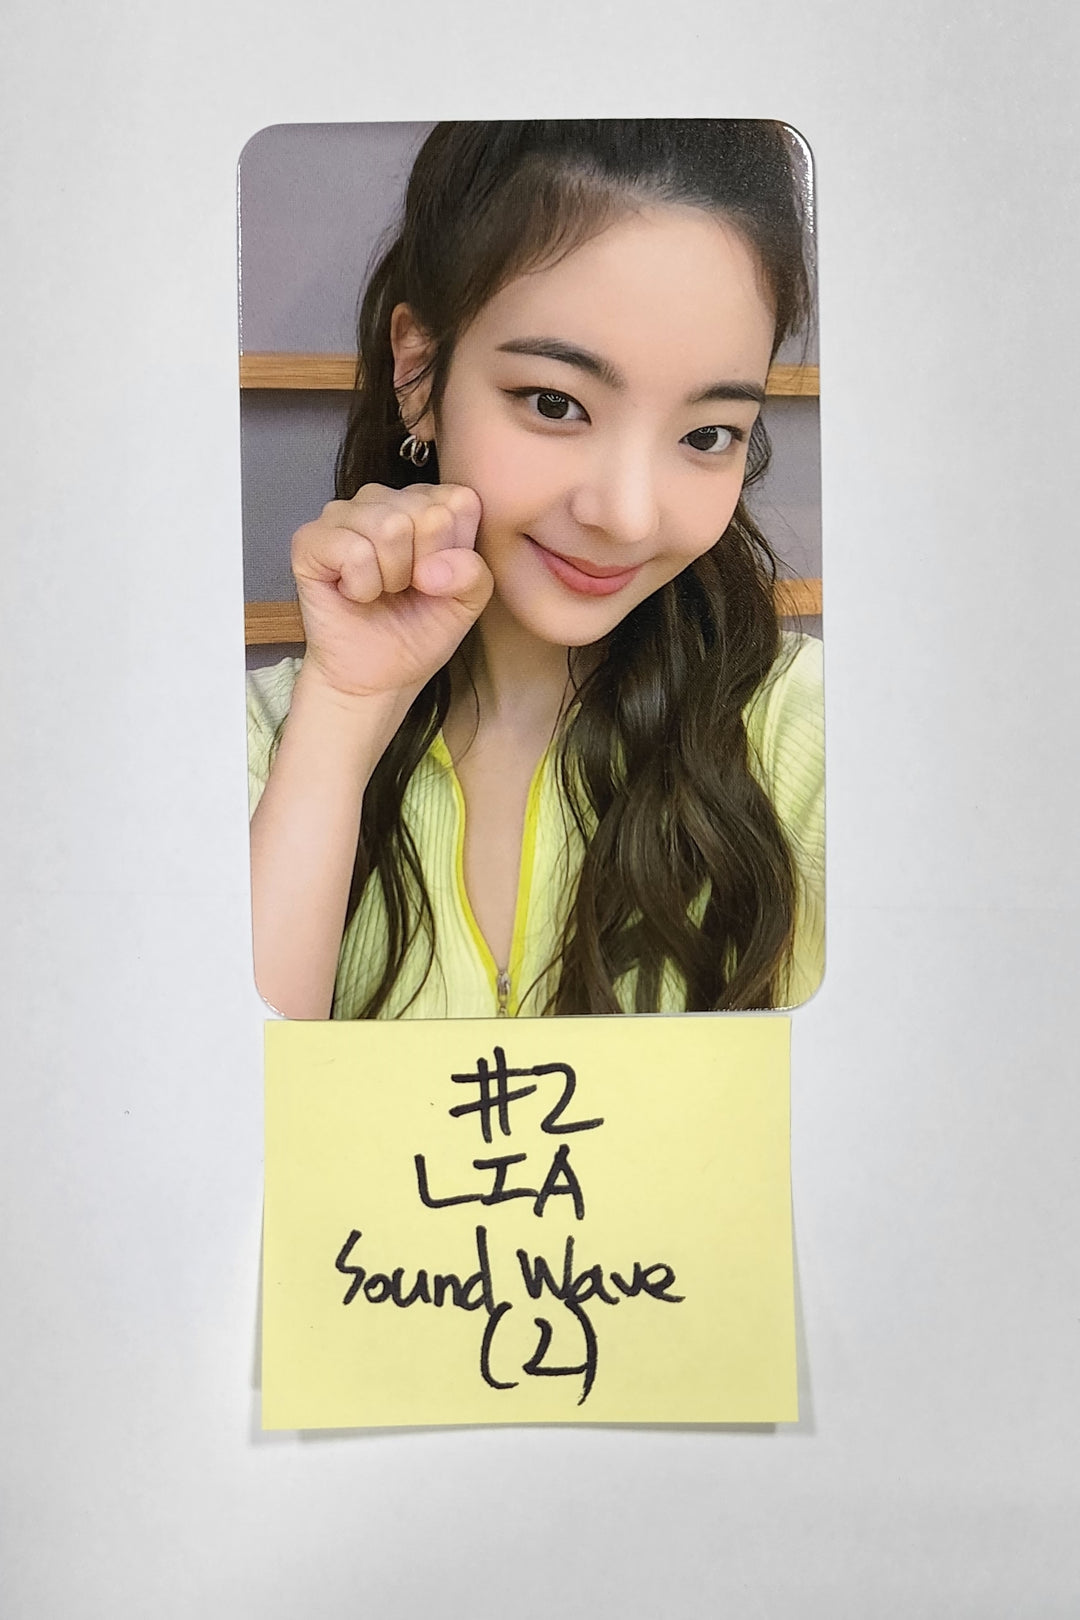 ITZY 'CHECKMATE' - Soundwave Fansign Event Photocard Round 3